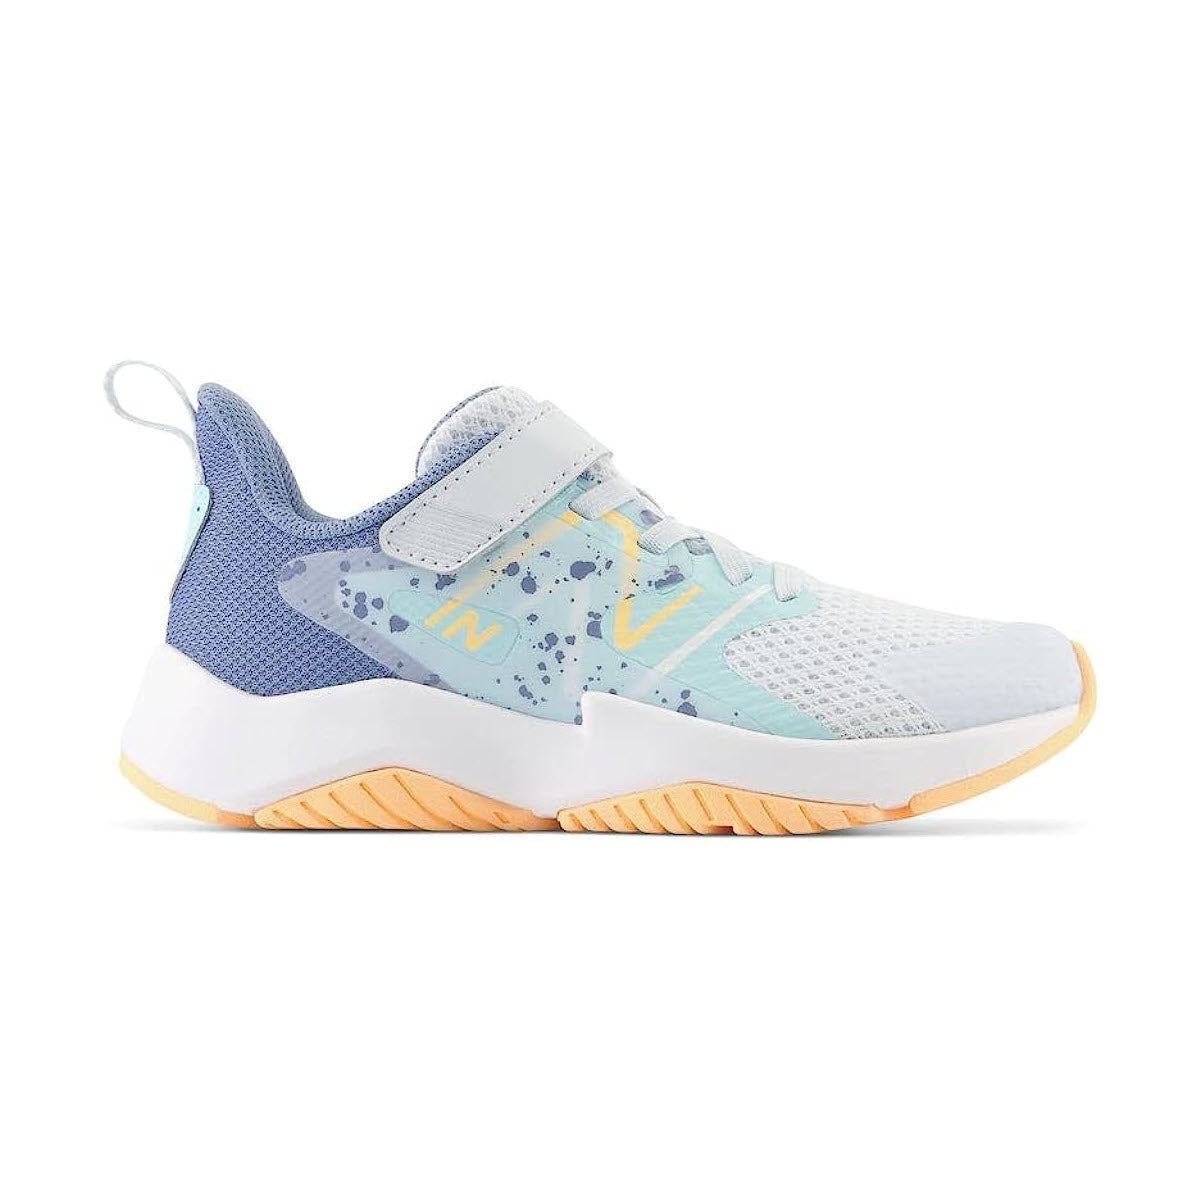 Side view of a New Balance Rave Run v2 Ice Blue kids&#39; running shoe in white, blue, and yellow with a chunky sole and brand logo visible.